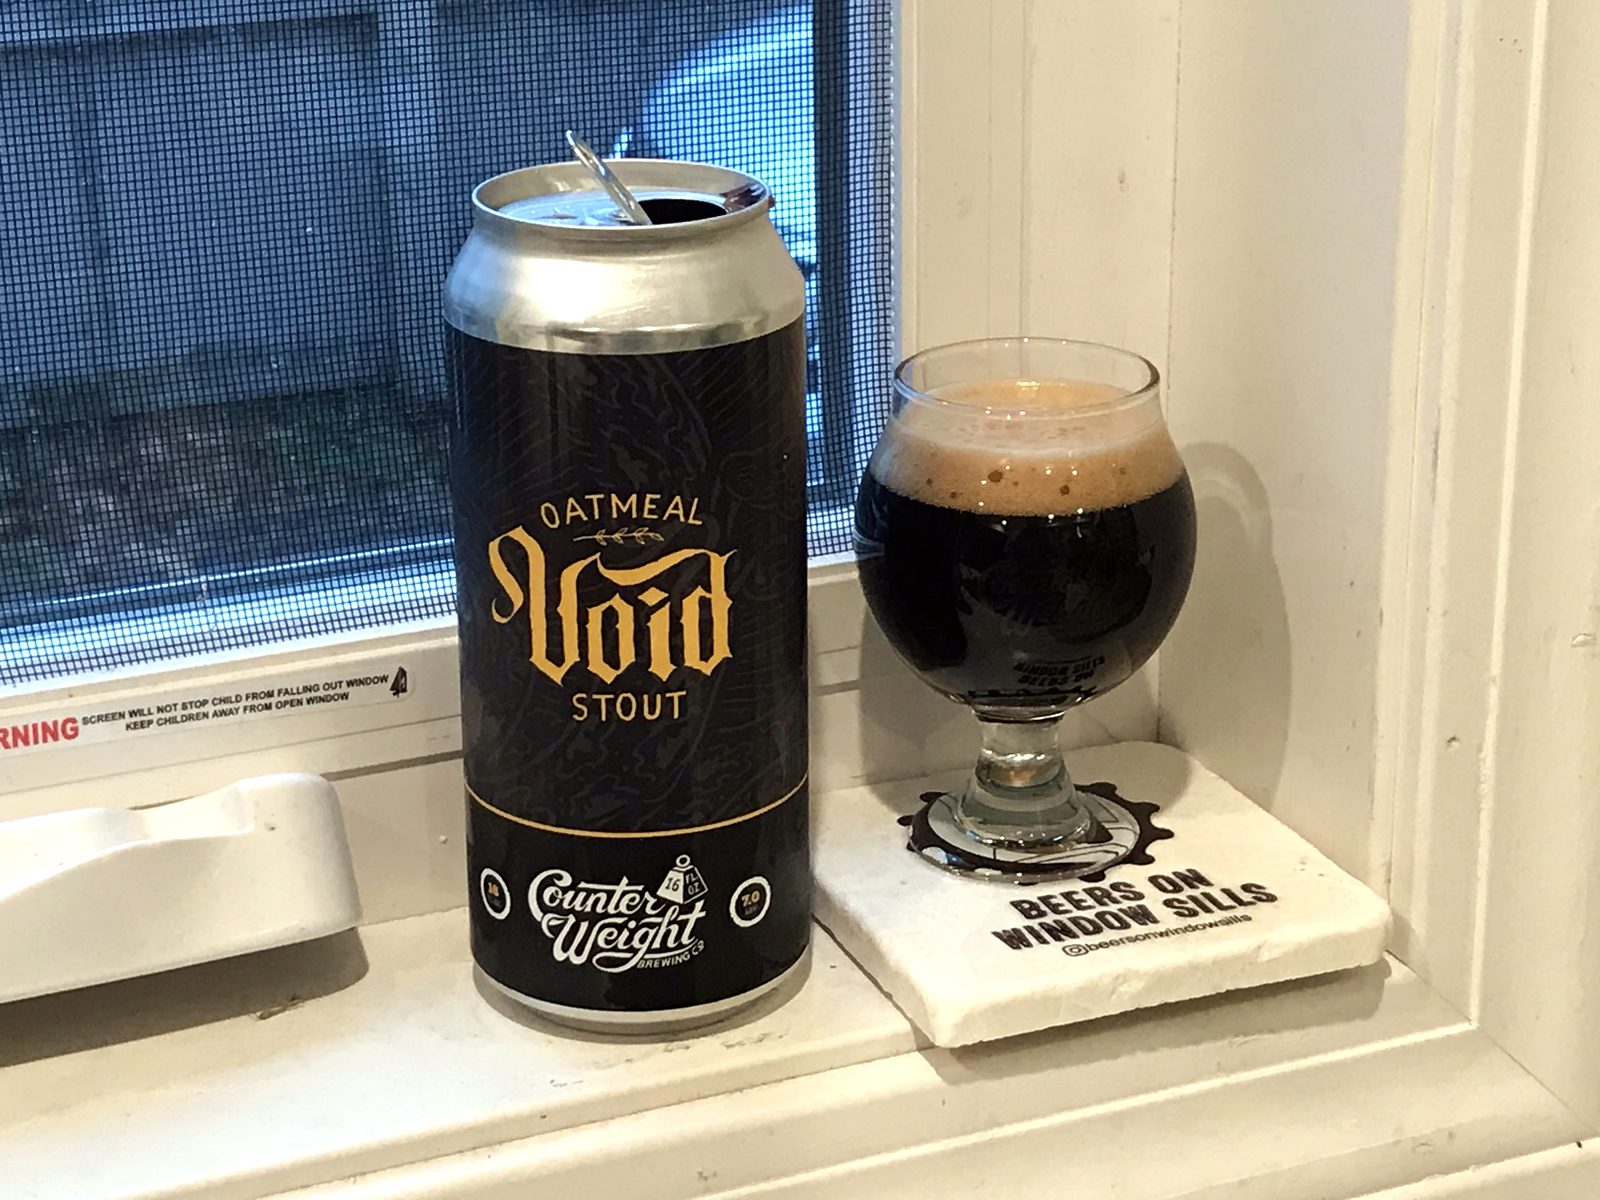 Counter Weight Brewing Company: Void